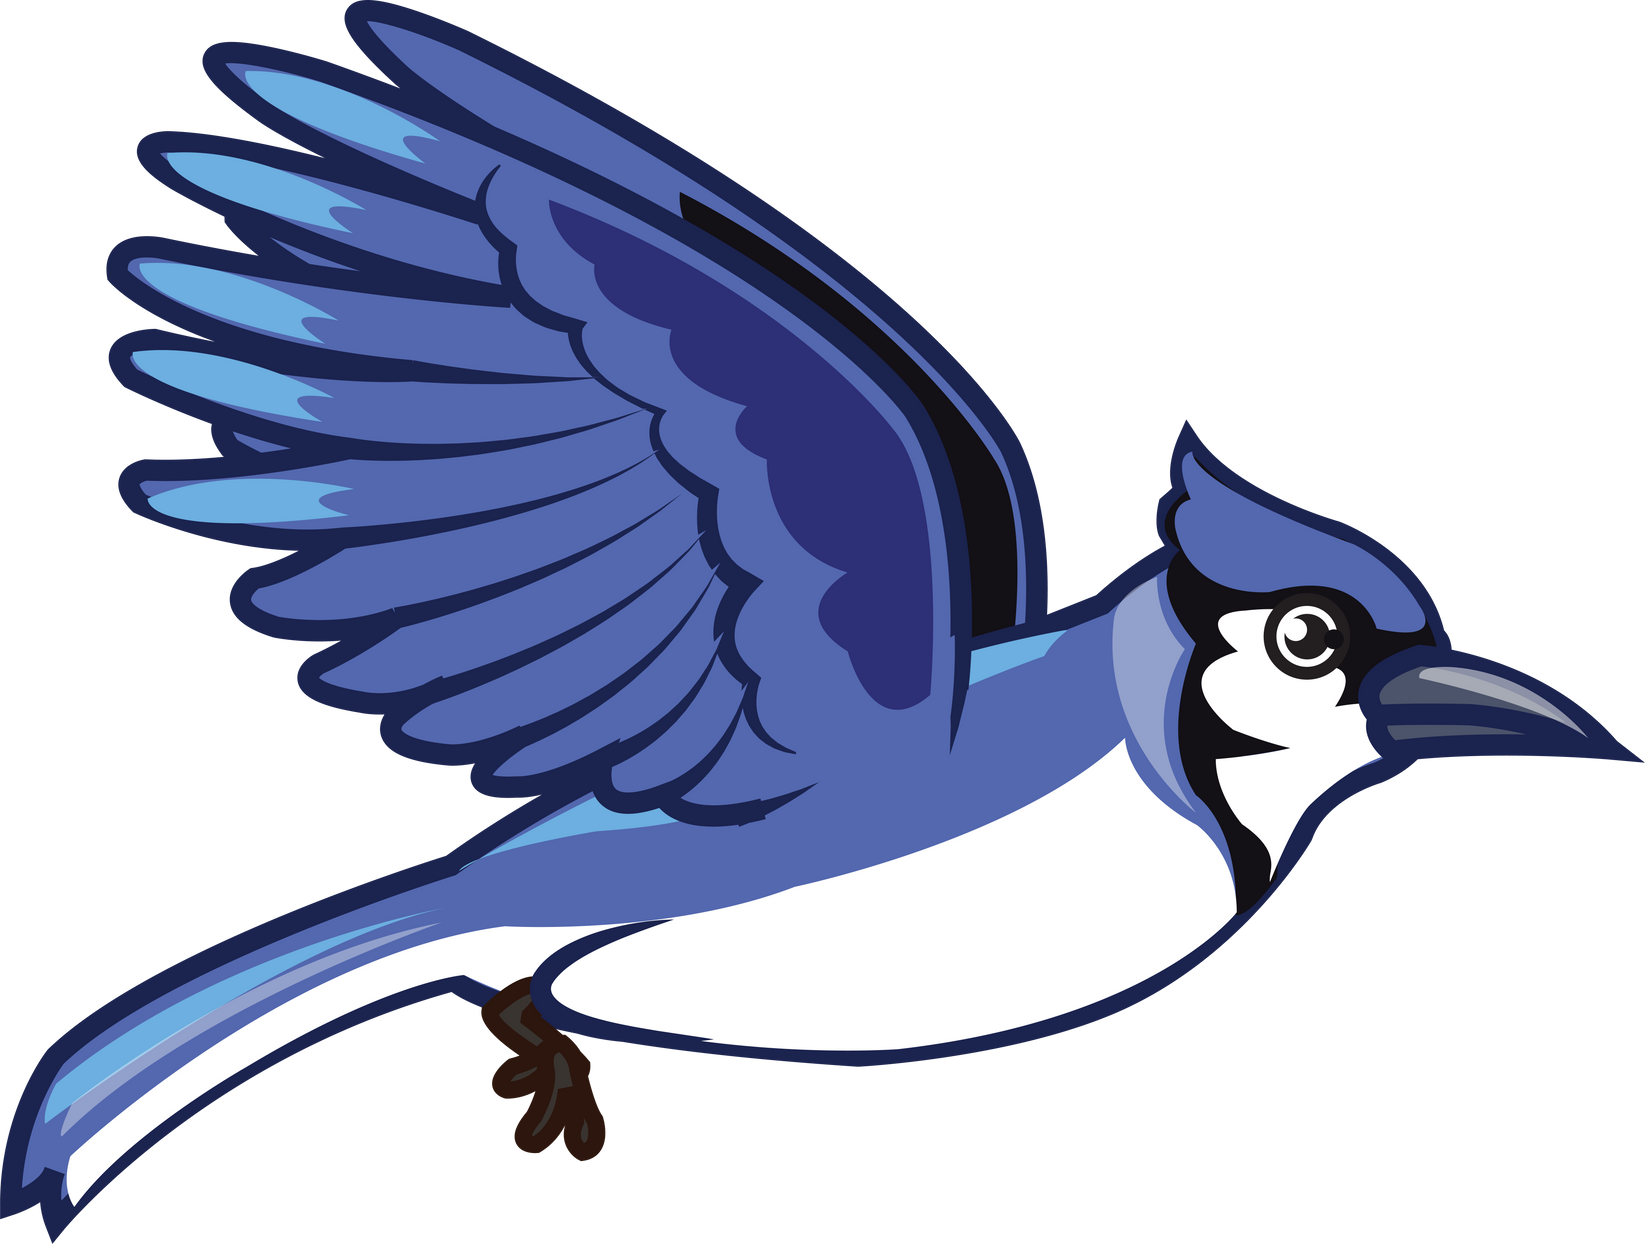 Blue Jay Bird Flapping Wings Flying